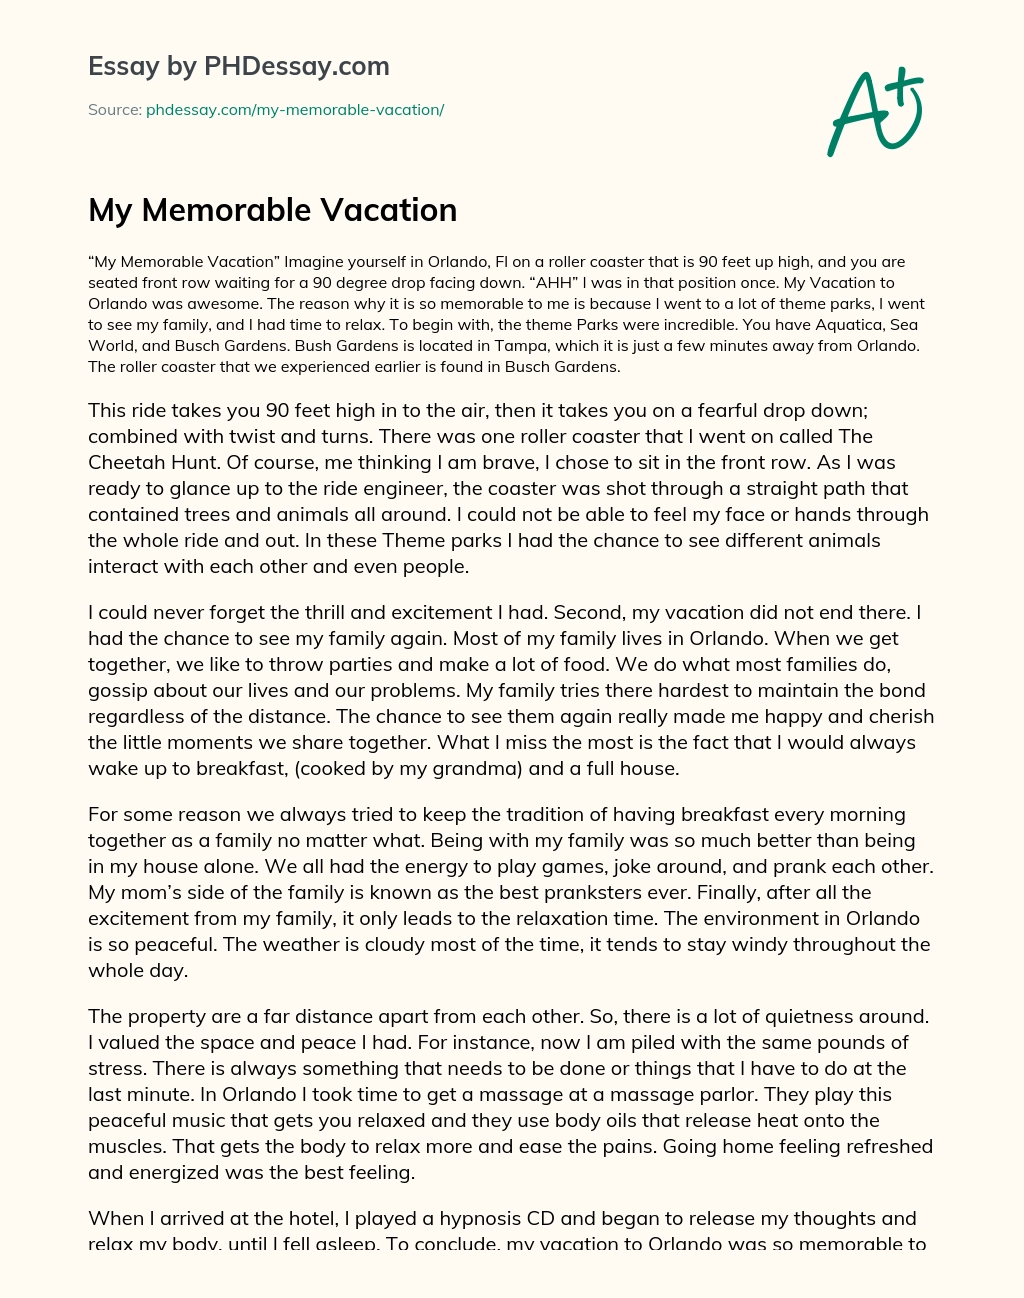 essay review the most memorable place of vacation